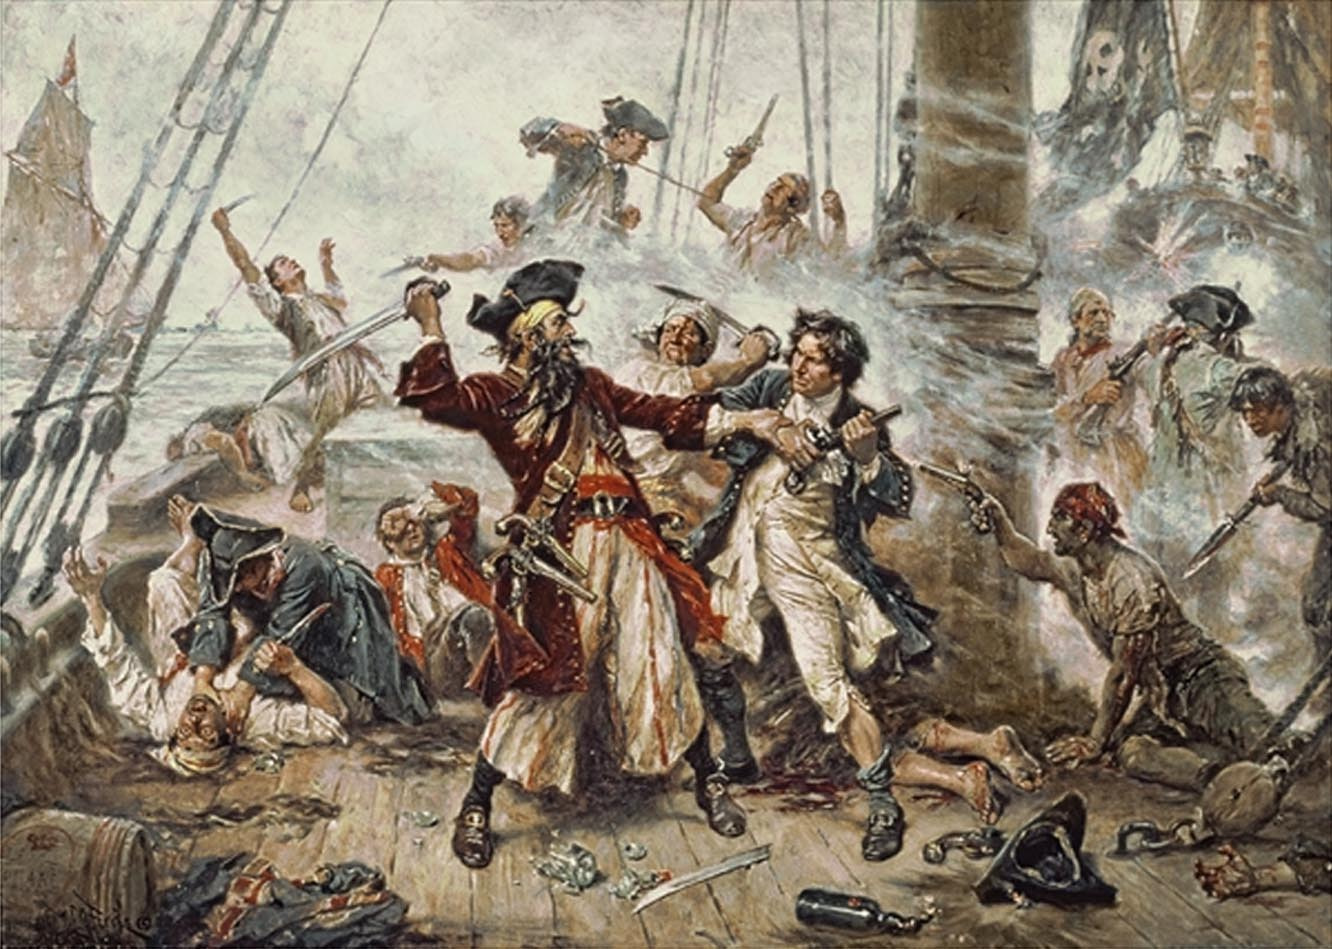 Pirate Crew Outsourcing History